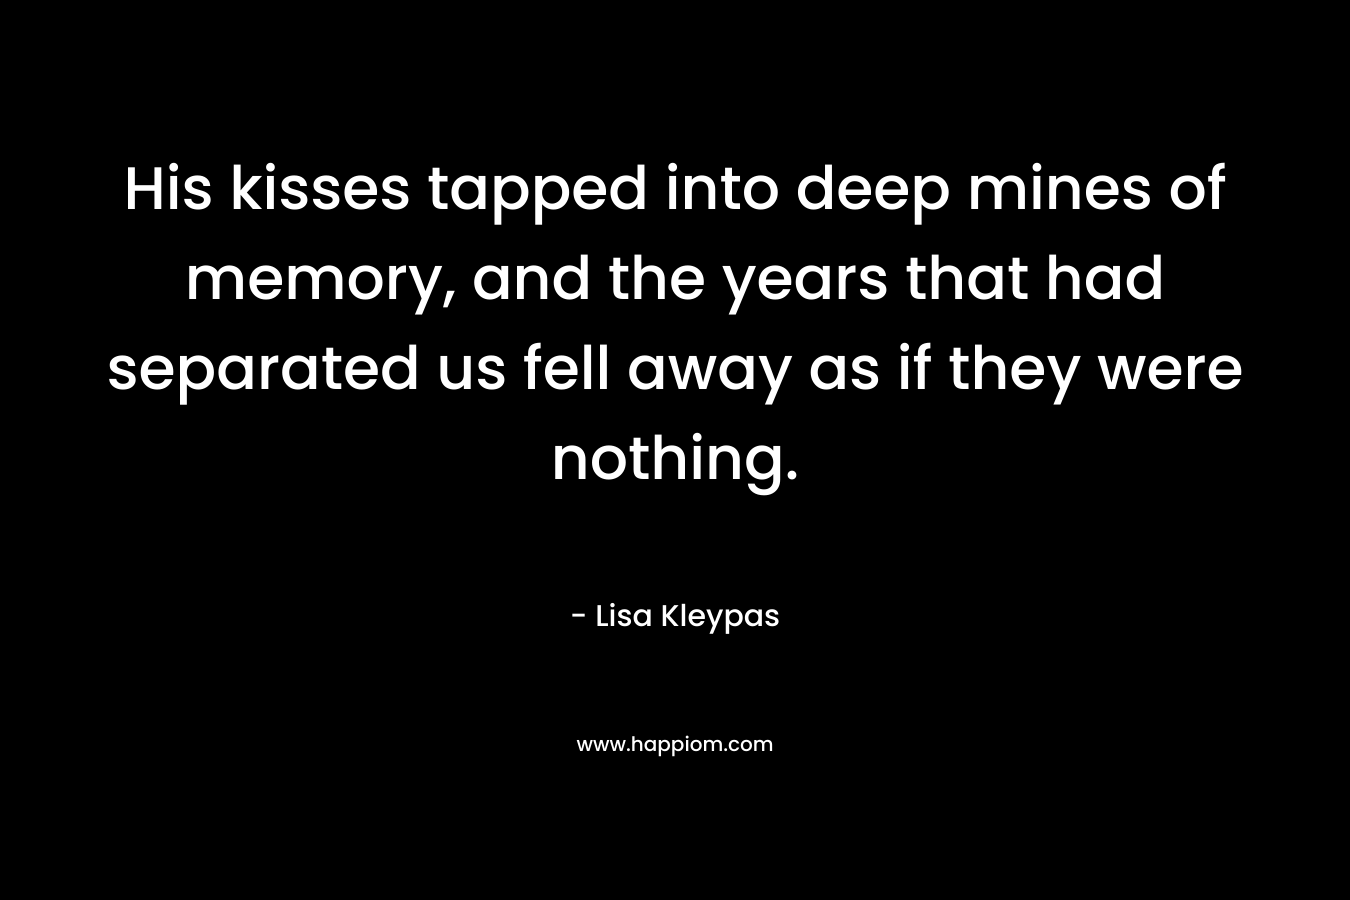 His kisses tapped into deep mines of memory, and the years that had separated us fell away as if they were nothing. – Lisa Kleypas